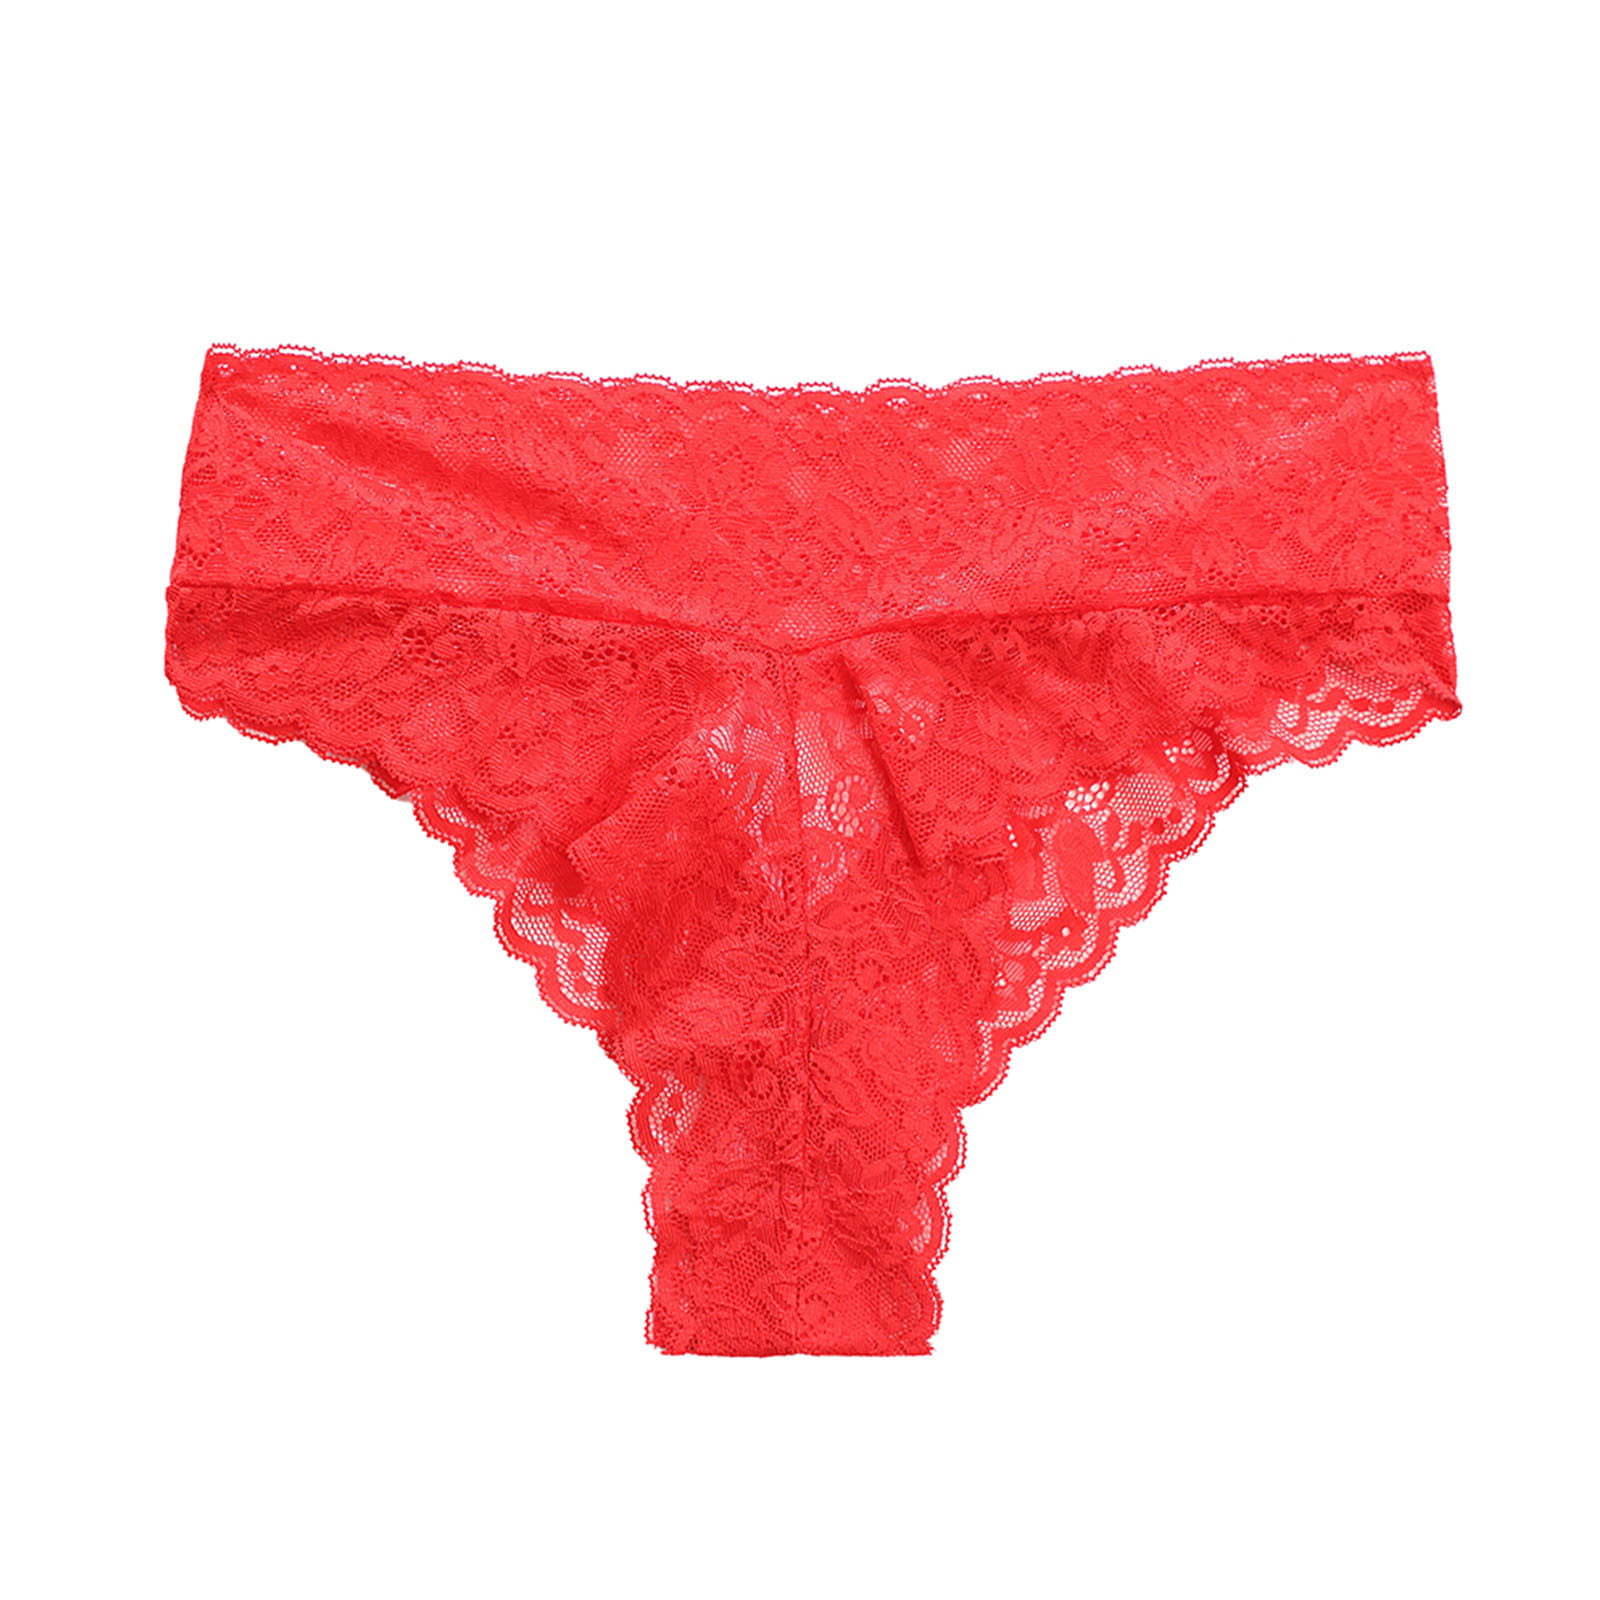 Youmylove Ladies Underwear Lace Breathable Thongs Comfortable Female  Intimates Red Basic Lingerie Briefs Underpants 1PC Bragas De Mujer